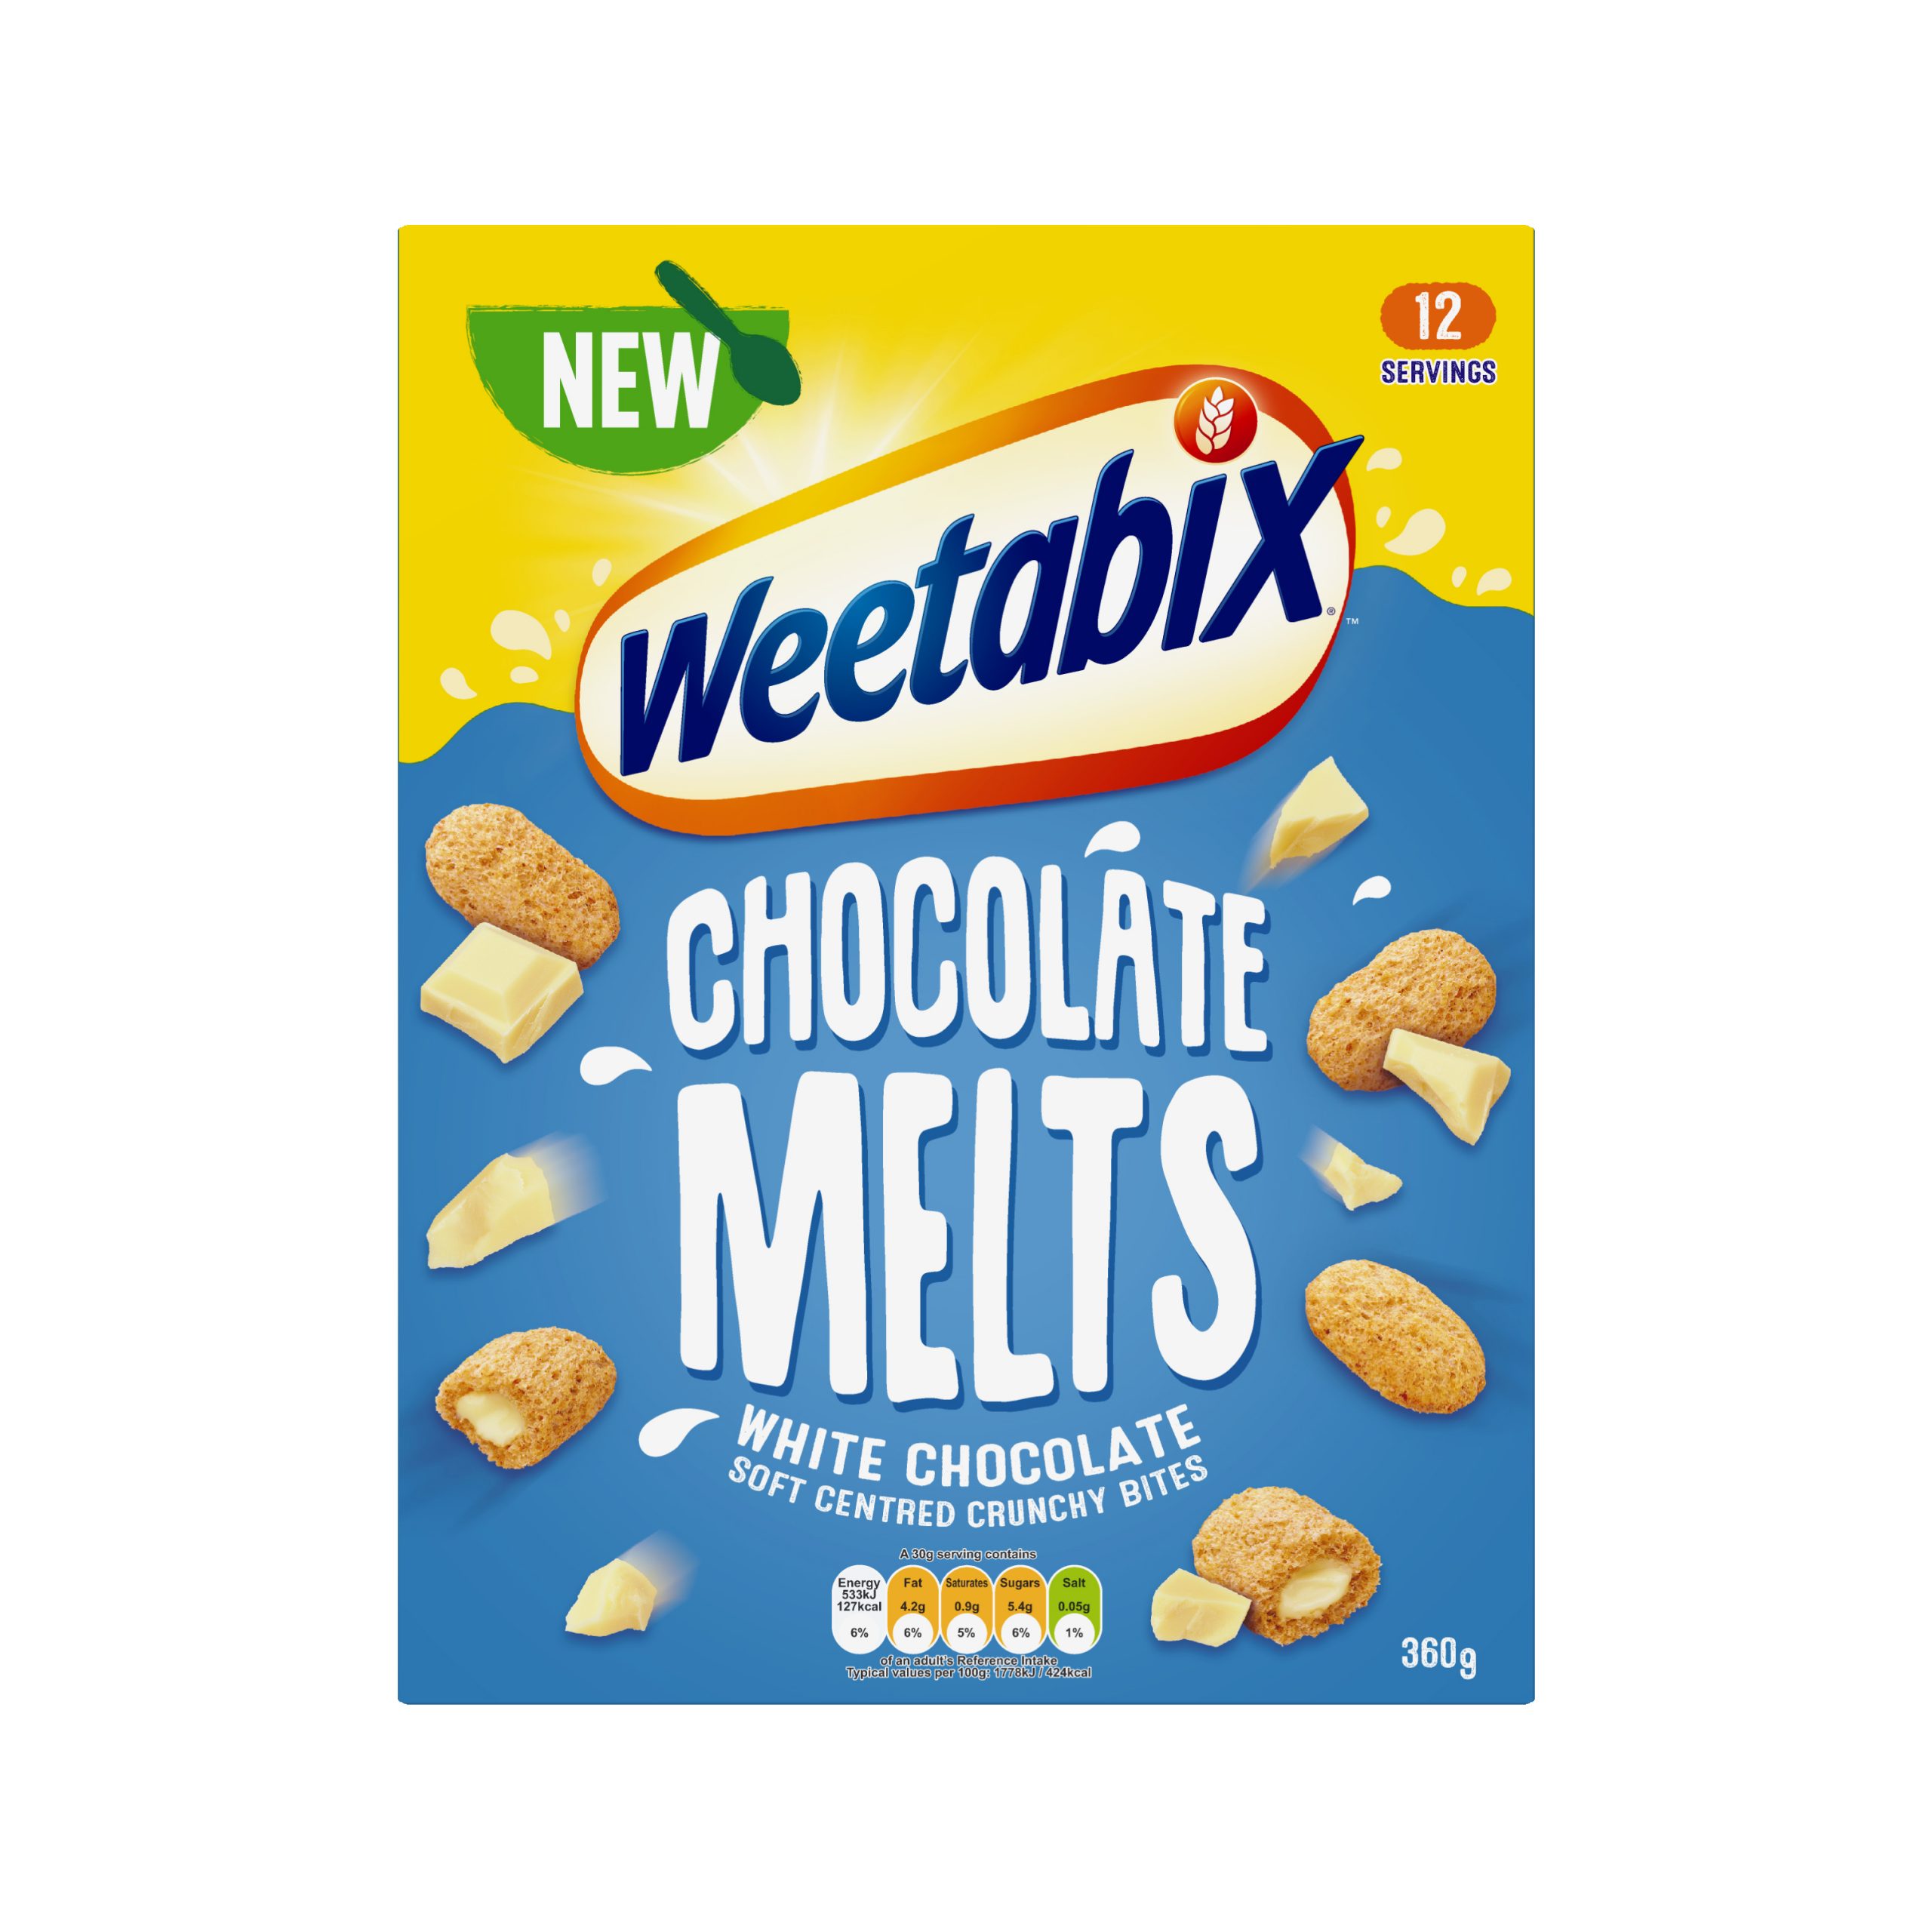 £2.5M investment for Weetabix Melts this summer